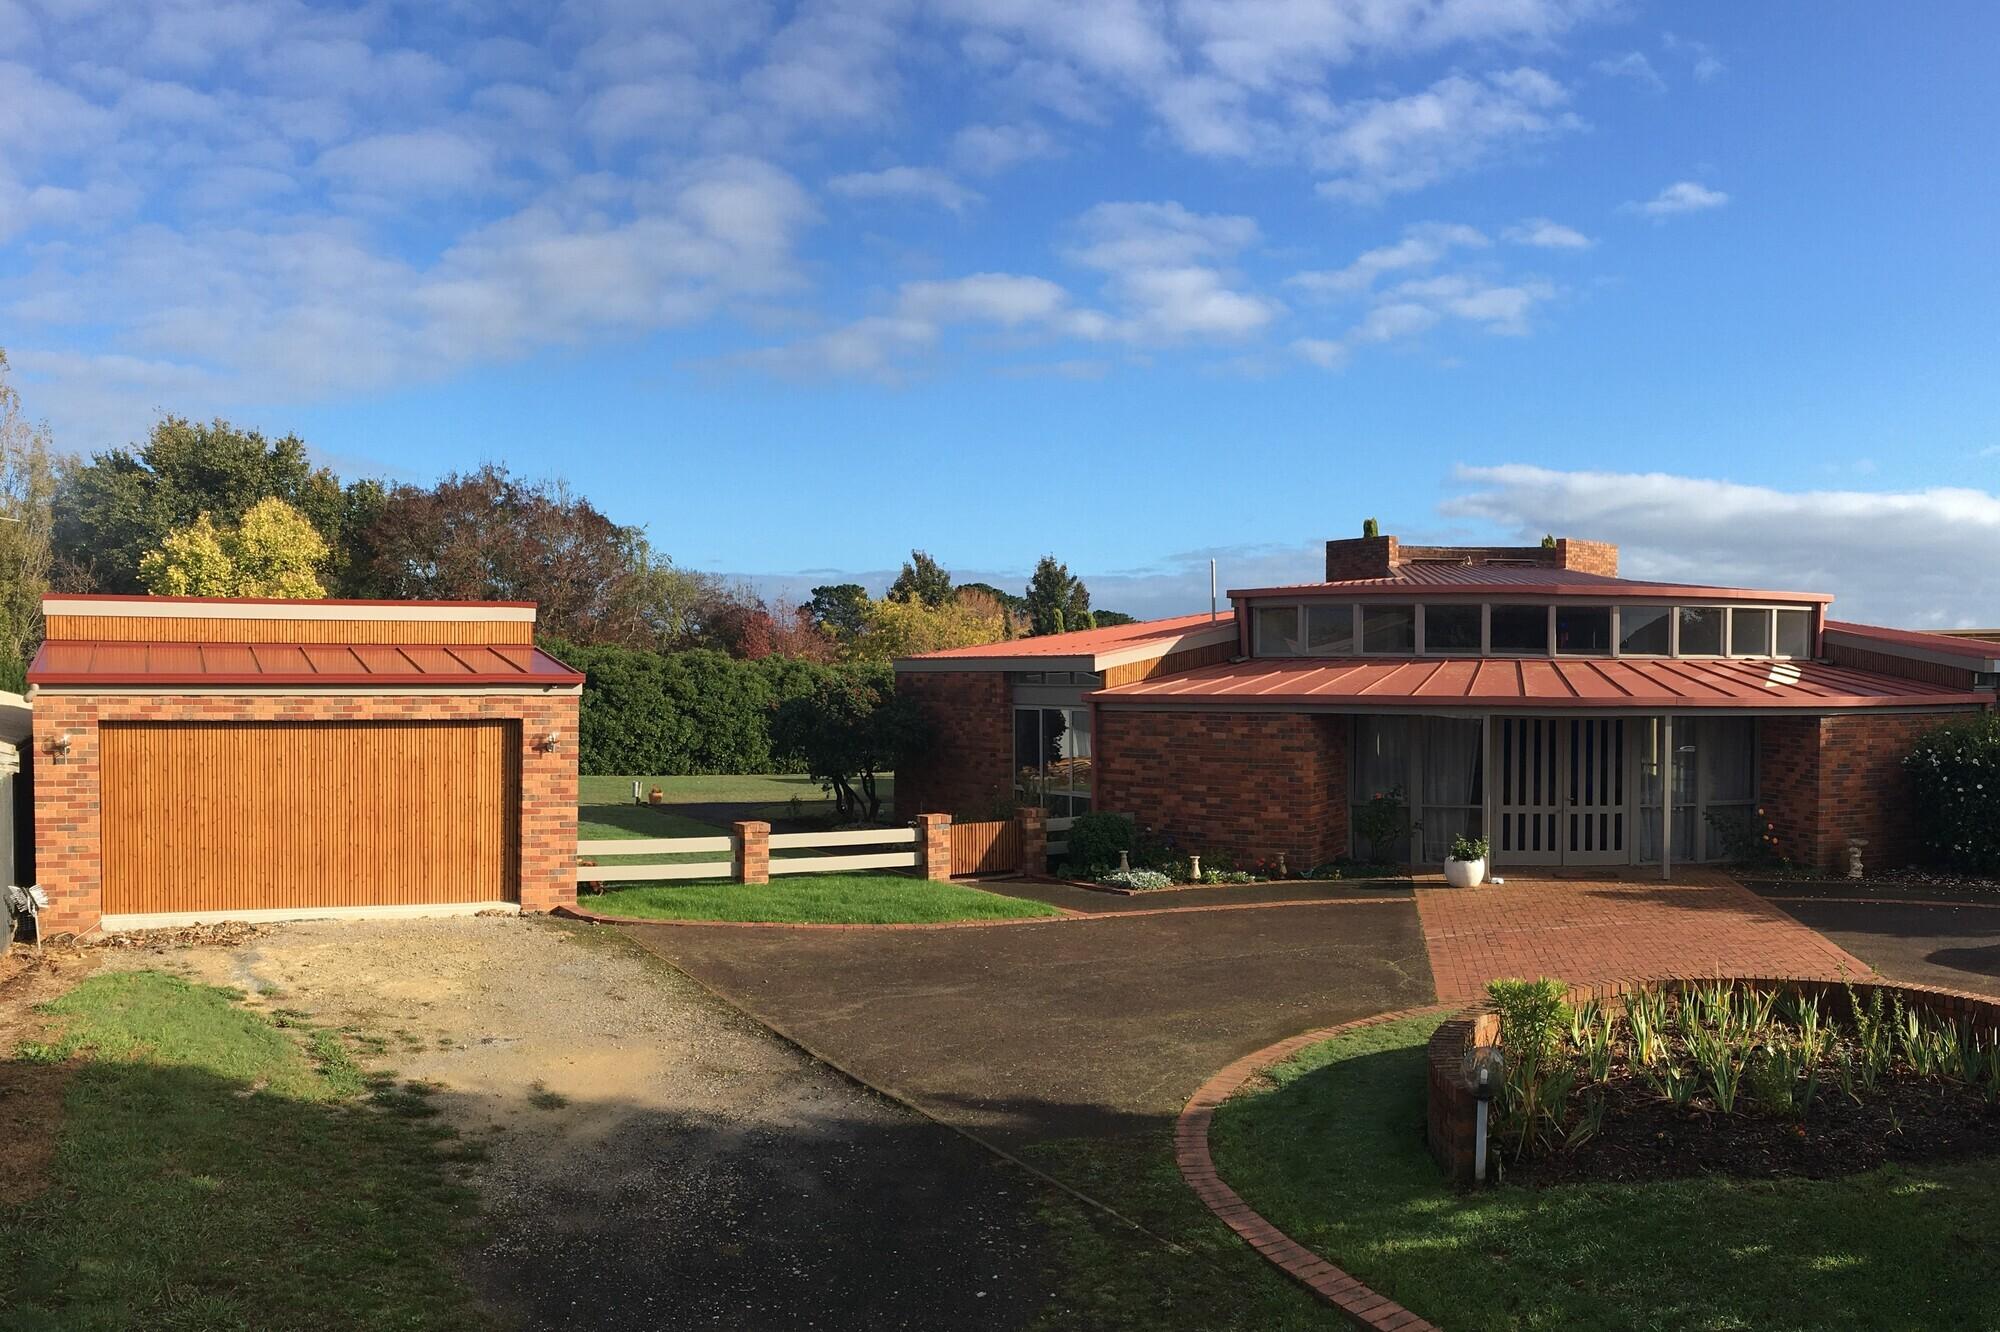 Neville from Thorpdale, VIC loves former church remodel. Roofing, Guttering & Fascia, Sheds, Patio & Pergola COLORBOND® steel in Colours Manor Red®, Basalt® and Shale Grey®